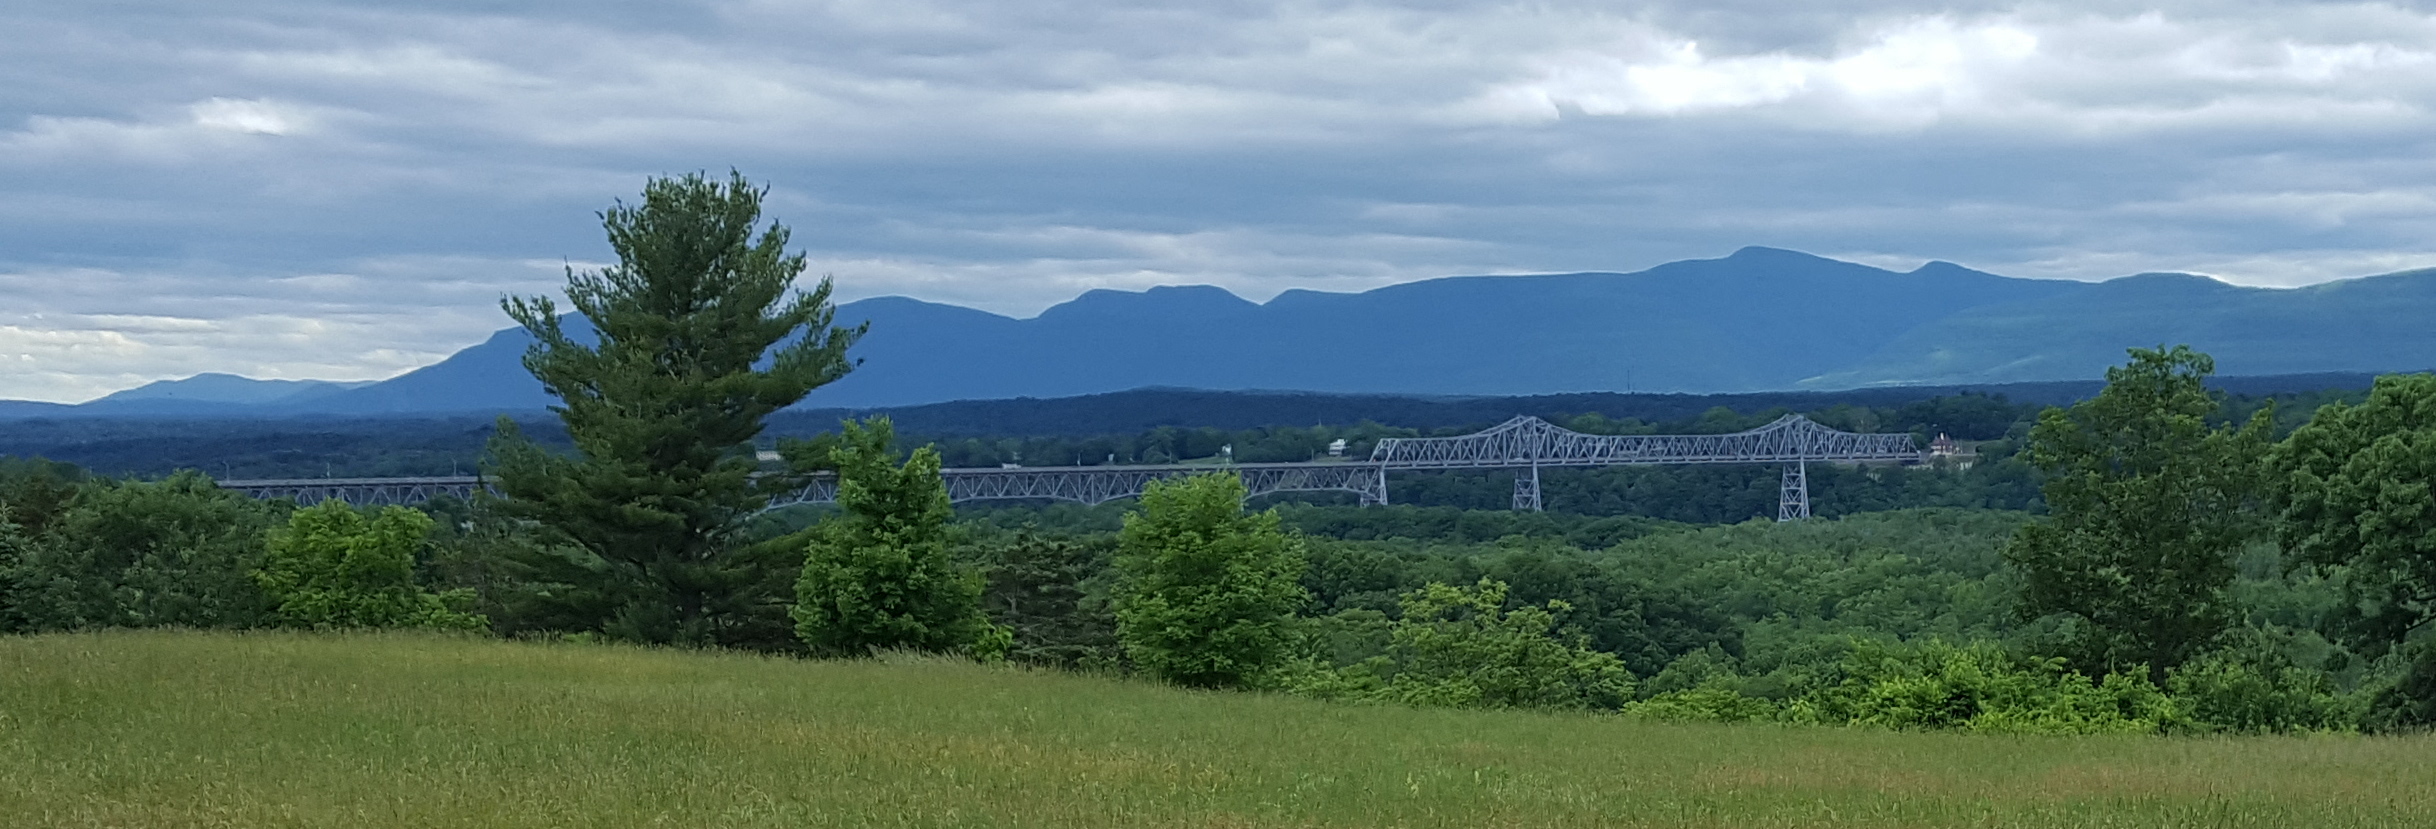 The Rip Van Winkle bridge over the Hudson River, with the Catskill Mountains in the background